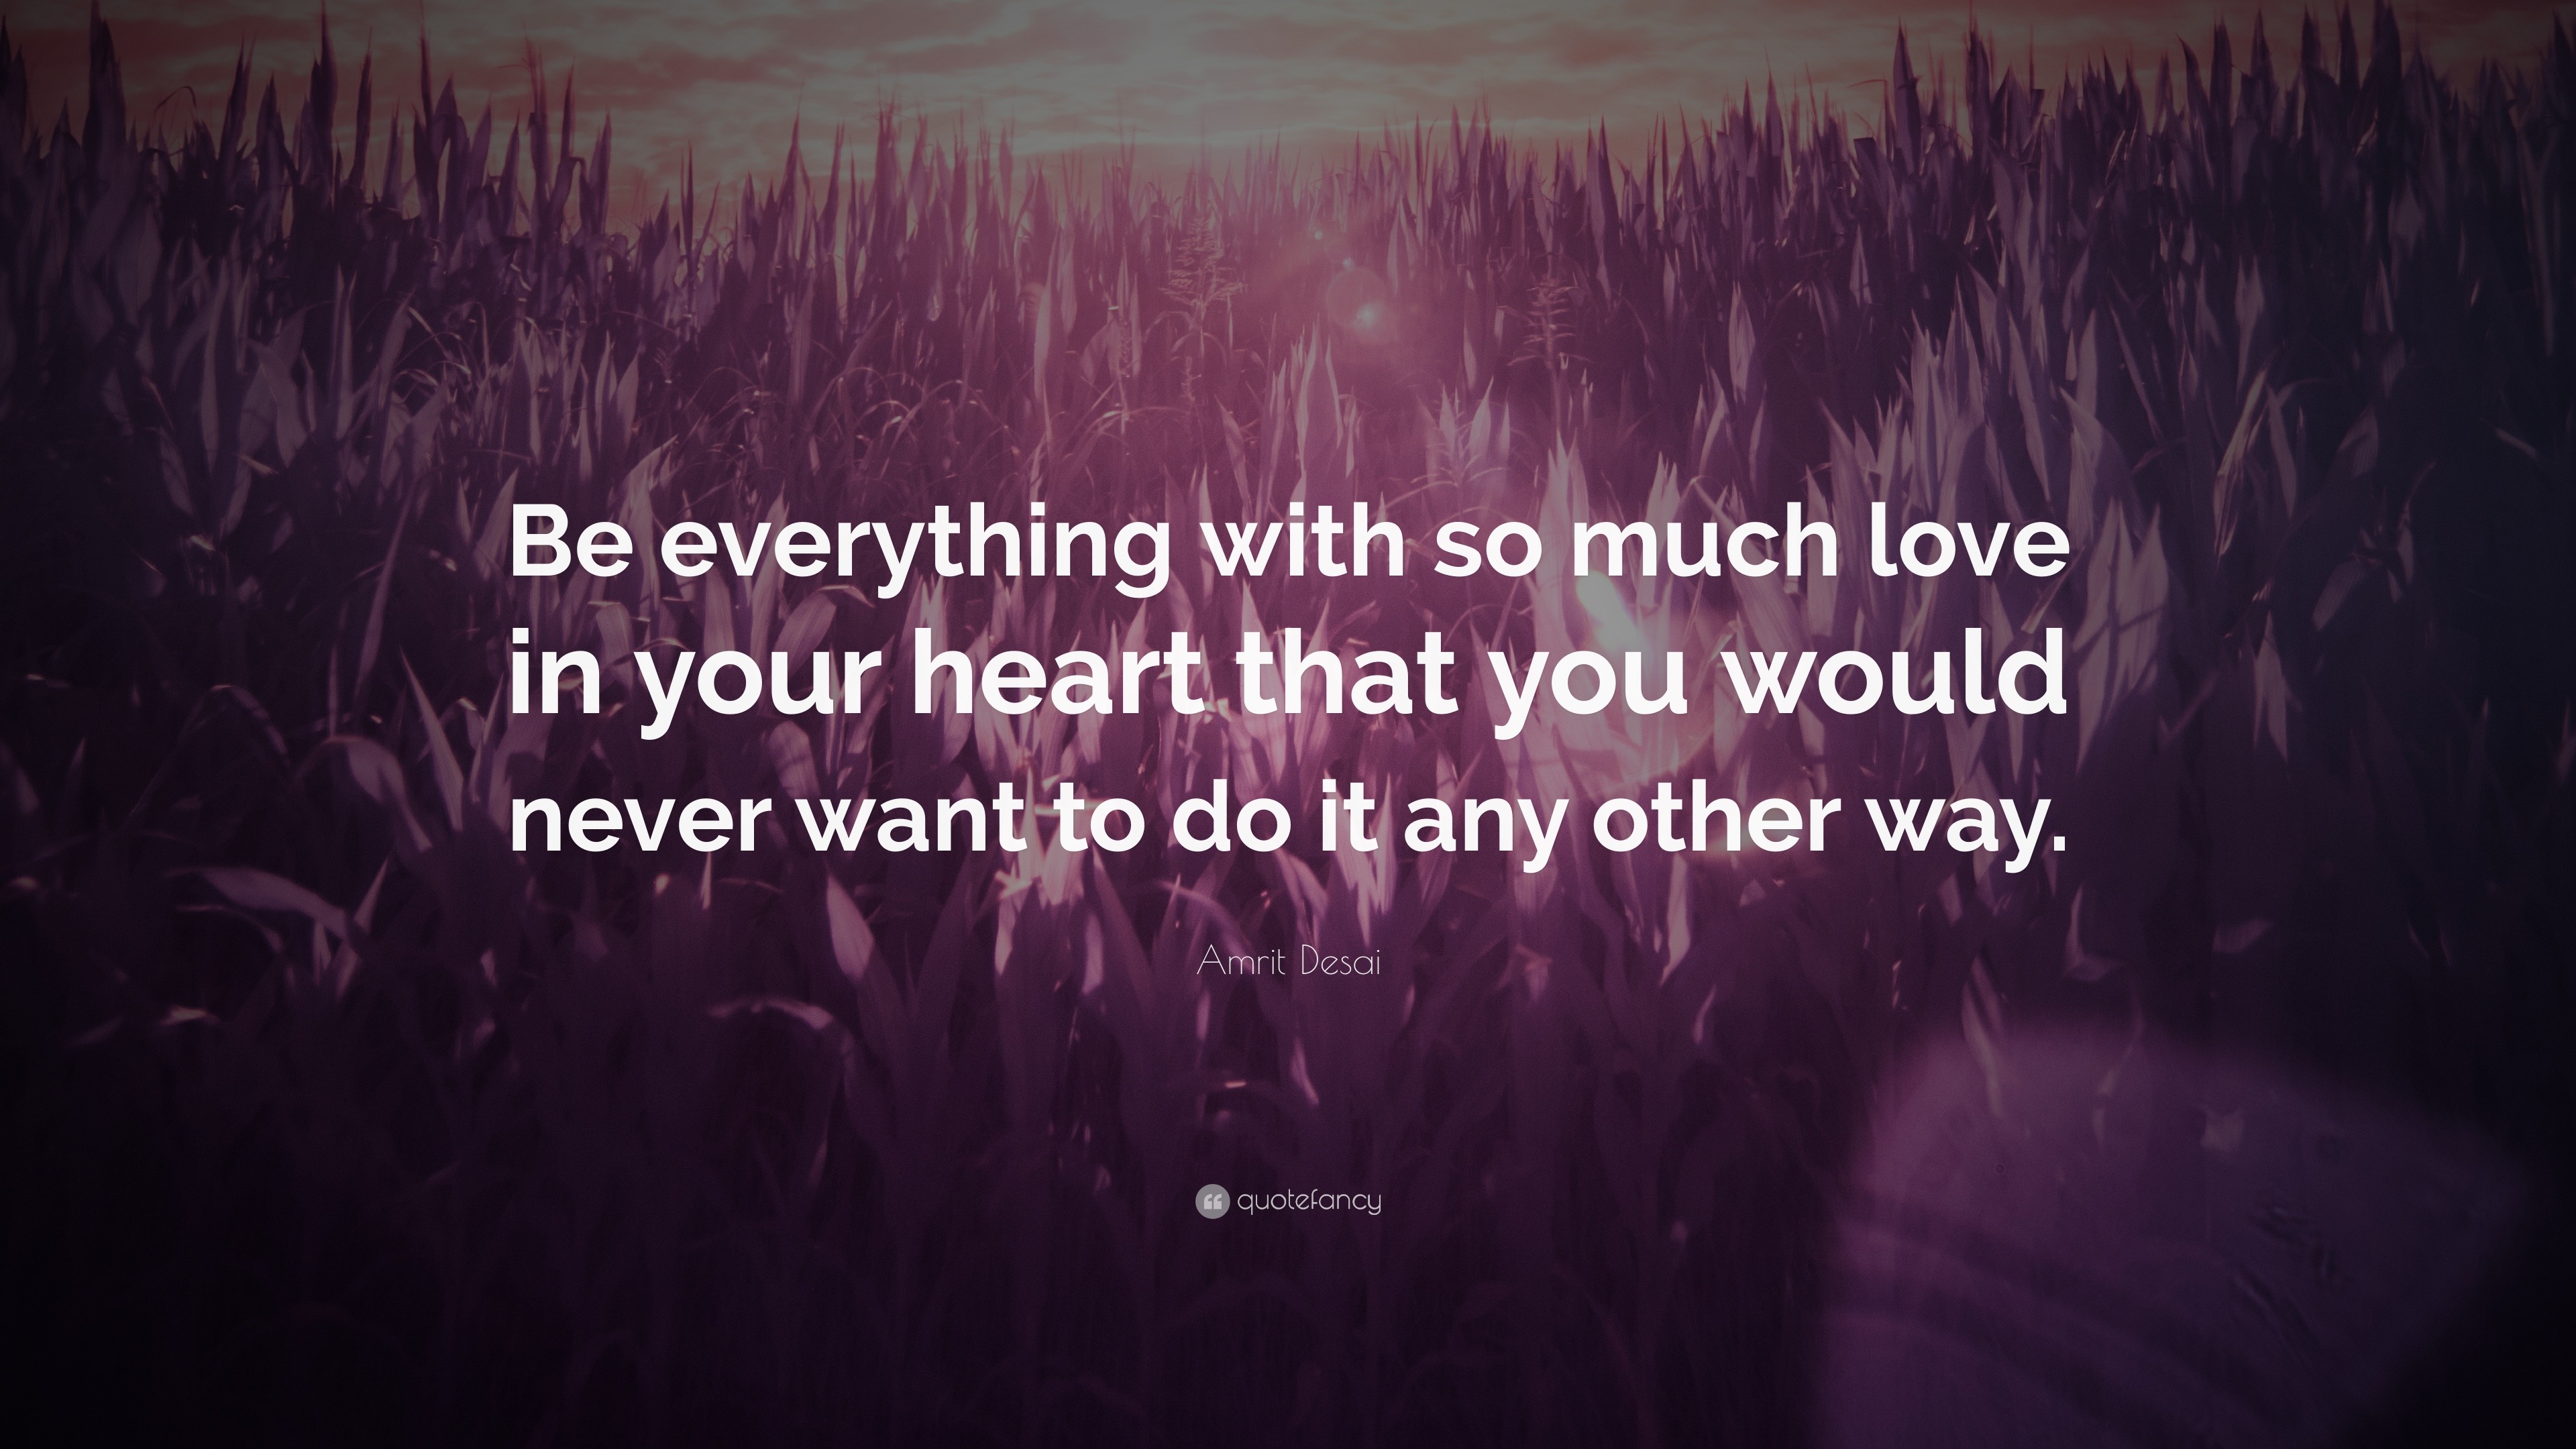 Amrit Desai Quote “Be everything with so much love in your heart that you